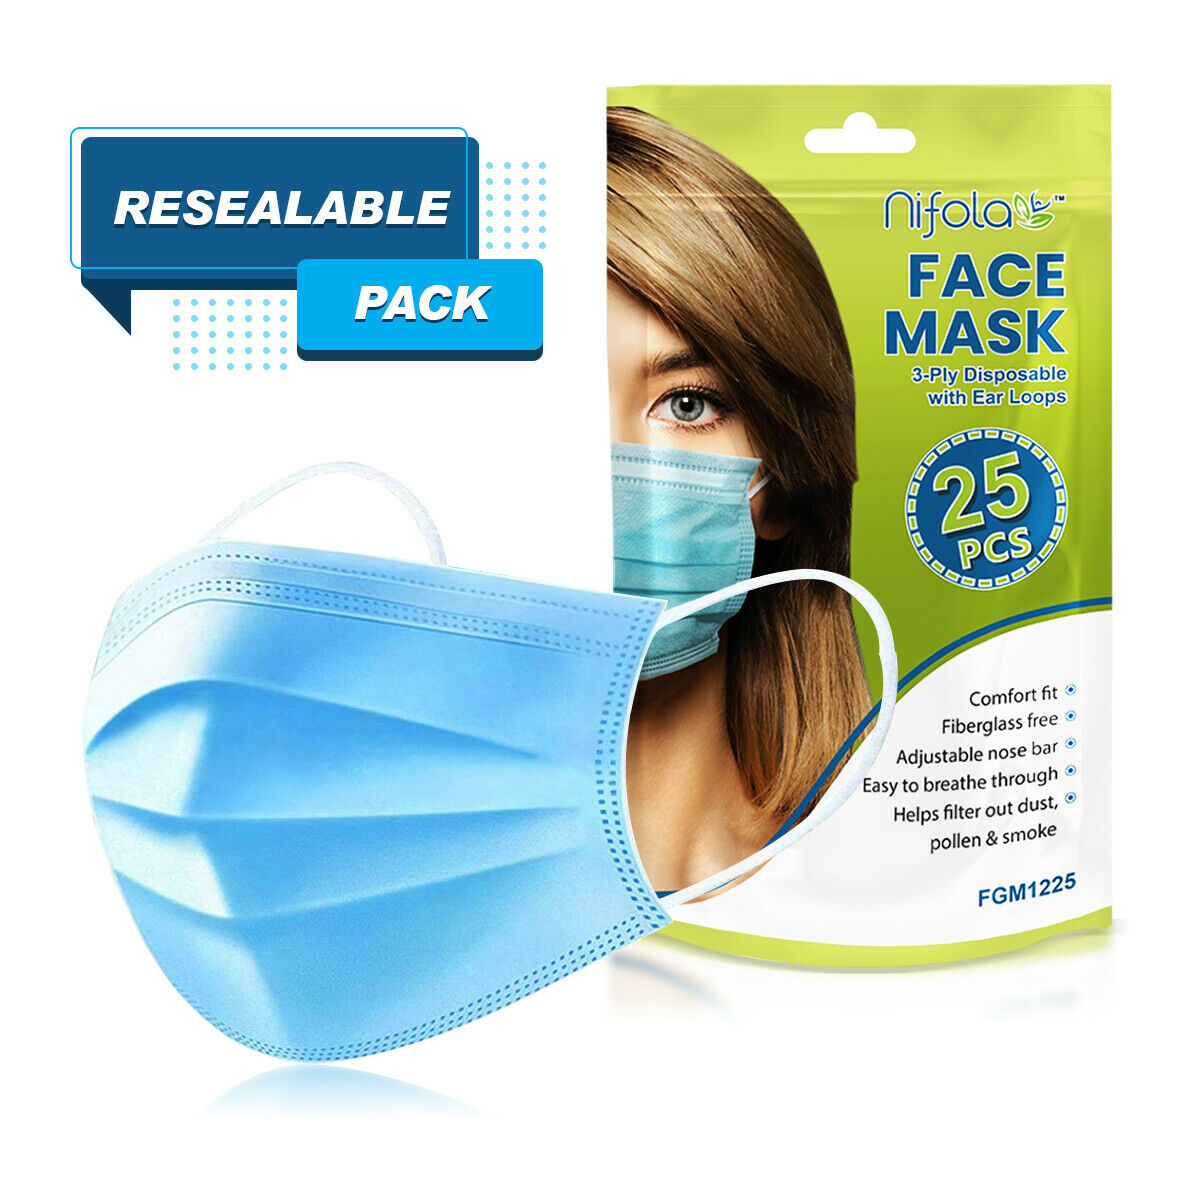 25 CT Disposable Ear loop Nose Clip Face Mask Blue 3 Ply Non-Woven Soft Fabric & Comfortable Outdoor Cover Guard Protection Breathable to Dust, Pollution, Fluids with Reusable Bag Package By Nifola - image 1 of 7